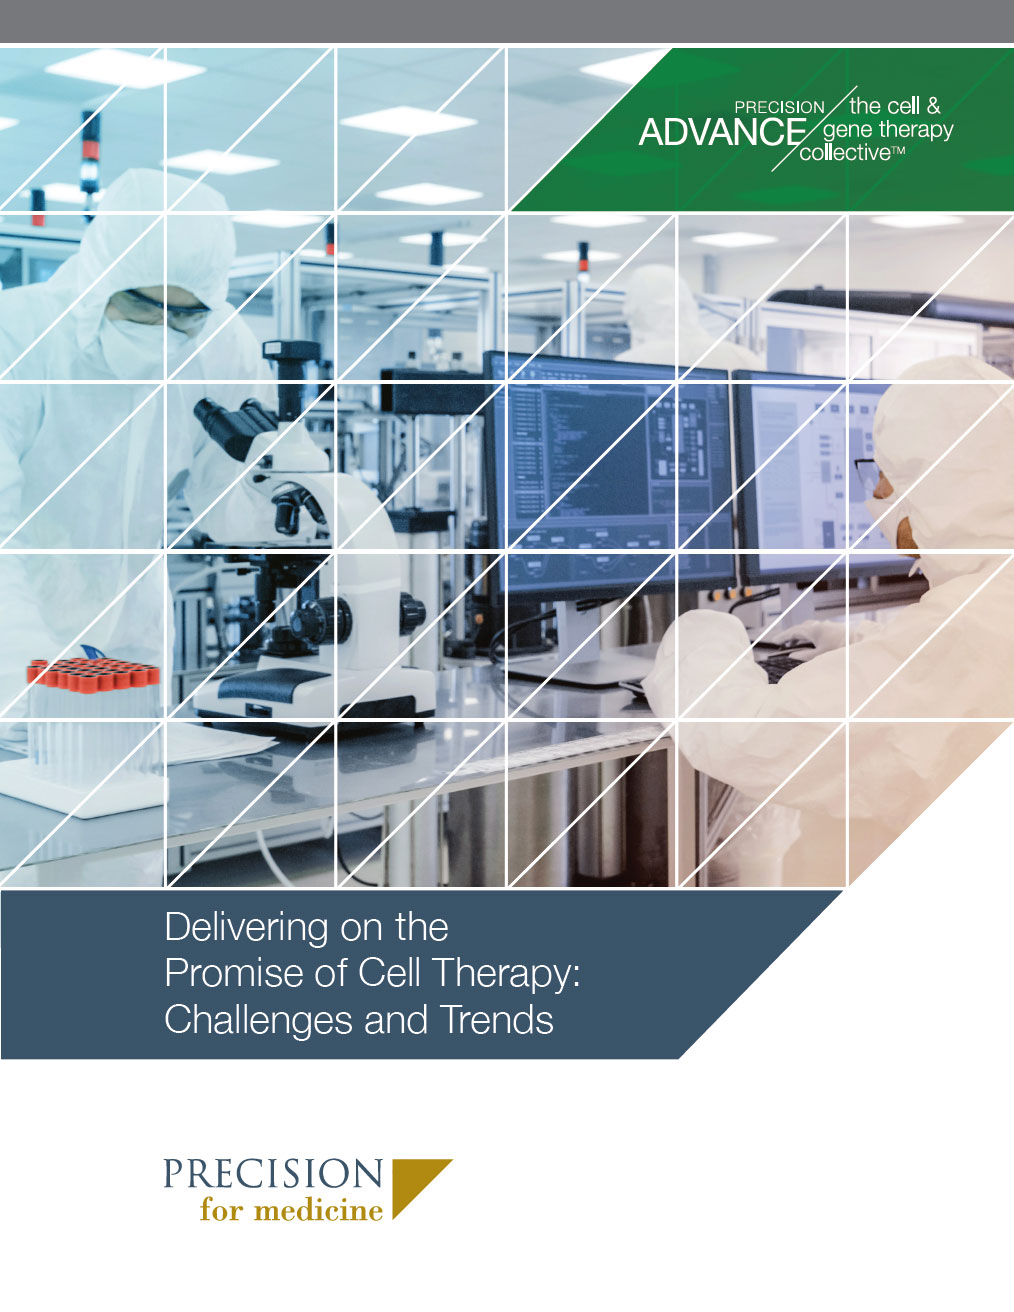 Delivering on the Promise of Cell Therapy: Challenges and Trends white paper thumbnail